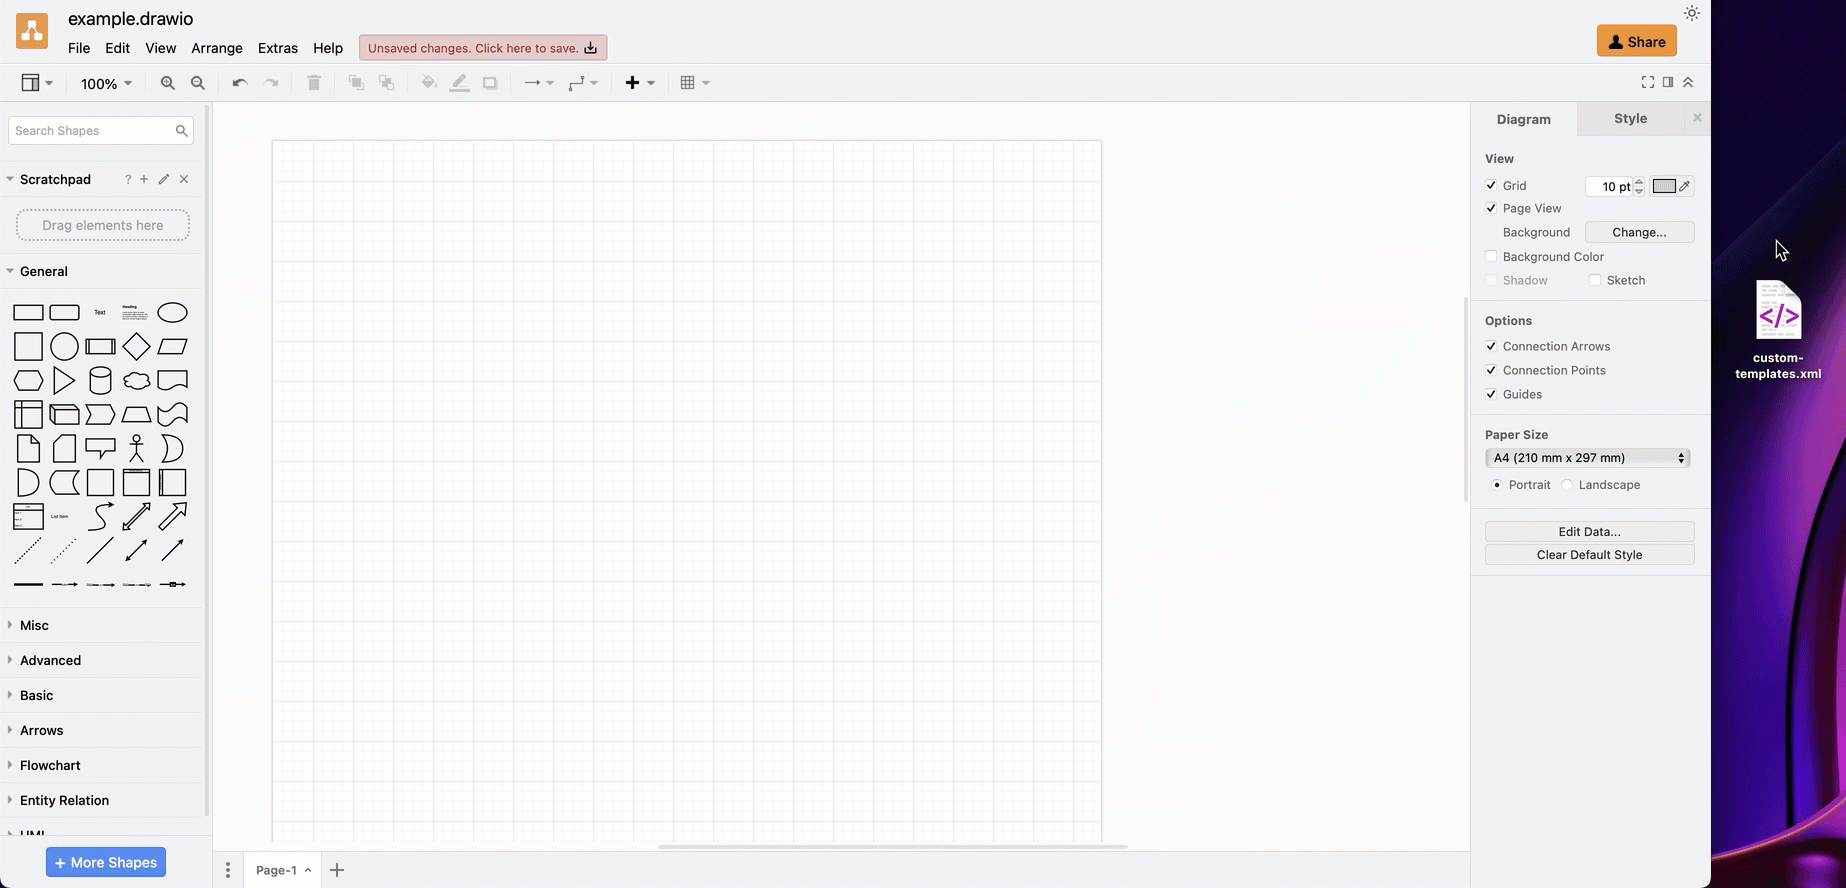 Add the shapes and templates from a custom library to the scratchpad in draw.io